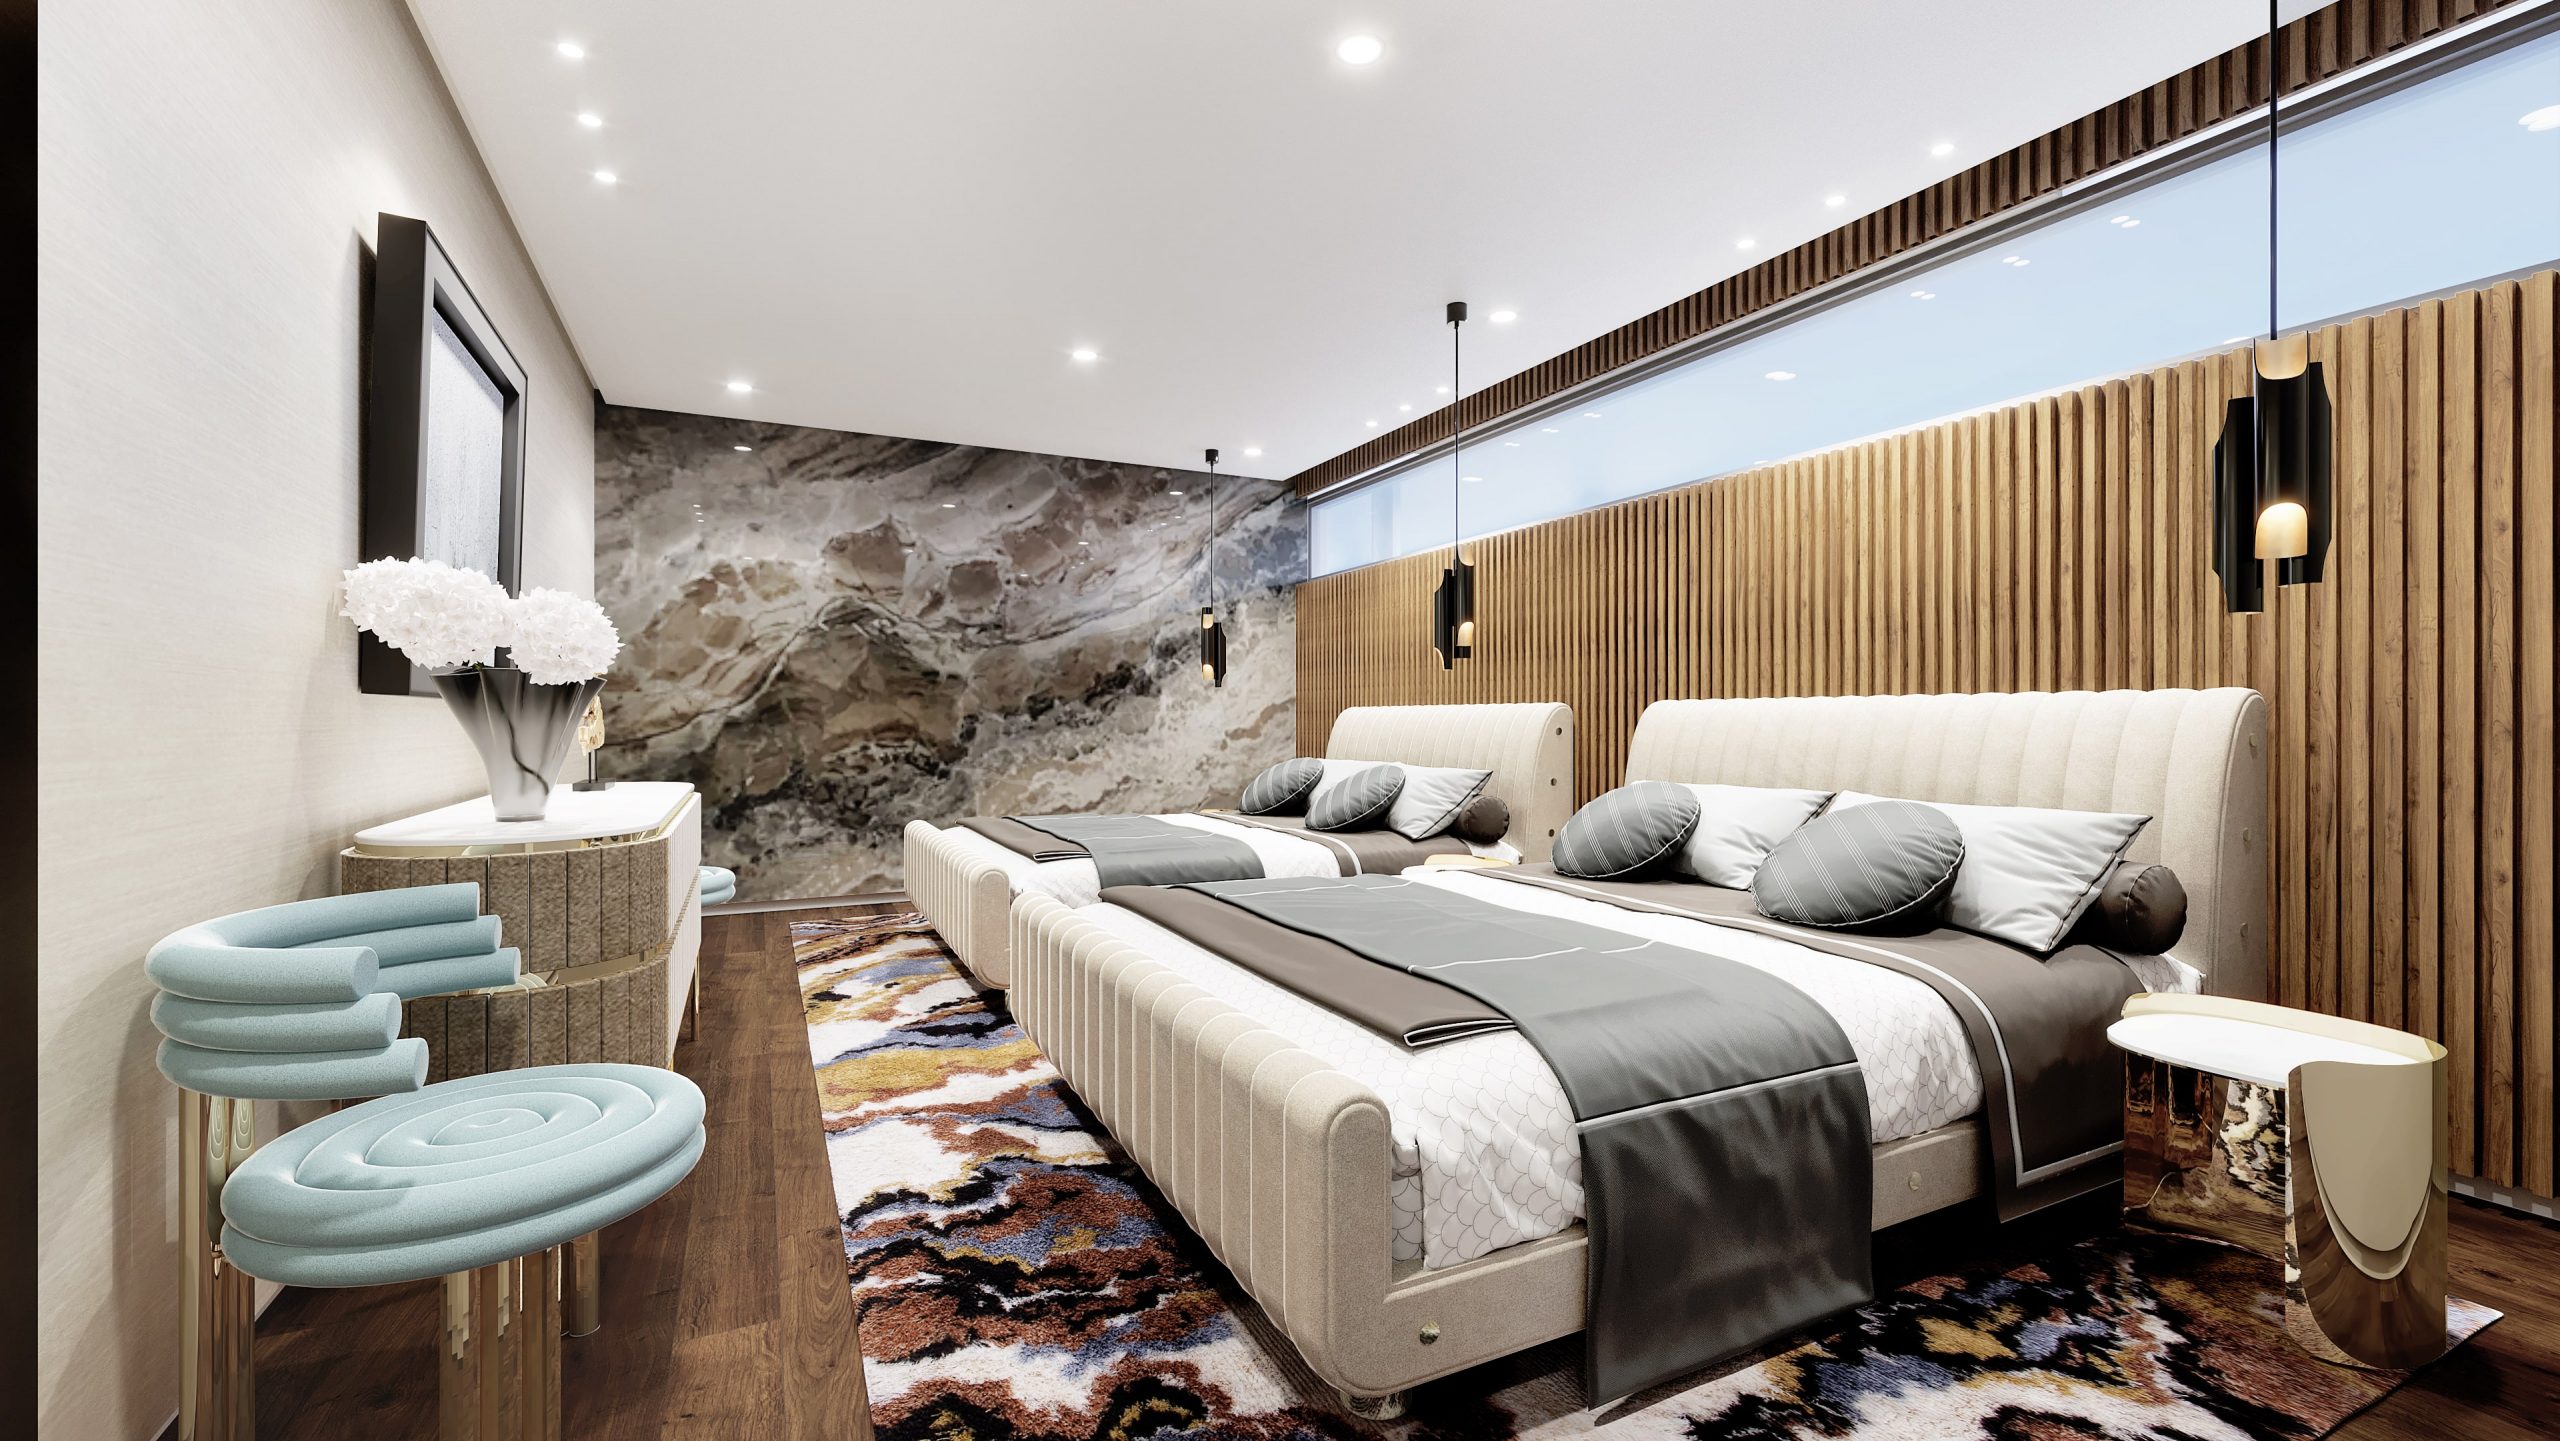 THE LUXURY GUEST ROOM OF THE PHILIPPINES PENTHOUSE